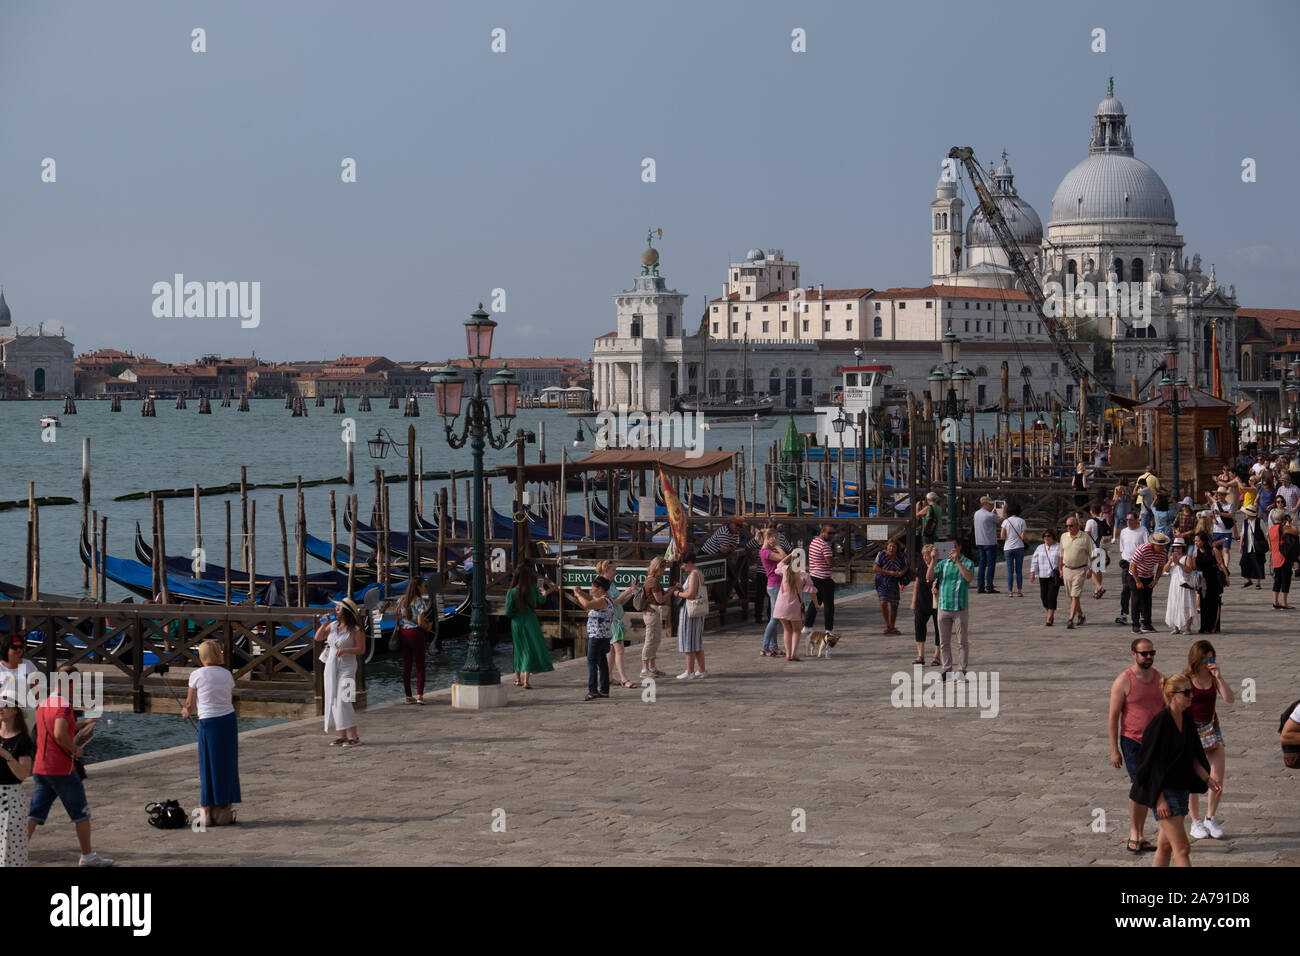 View of the busy water frontage with crowds of tourists and gondolas with the magnificent white building and dome of Punta della Dogma lit by the sun. Stock Photo